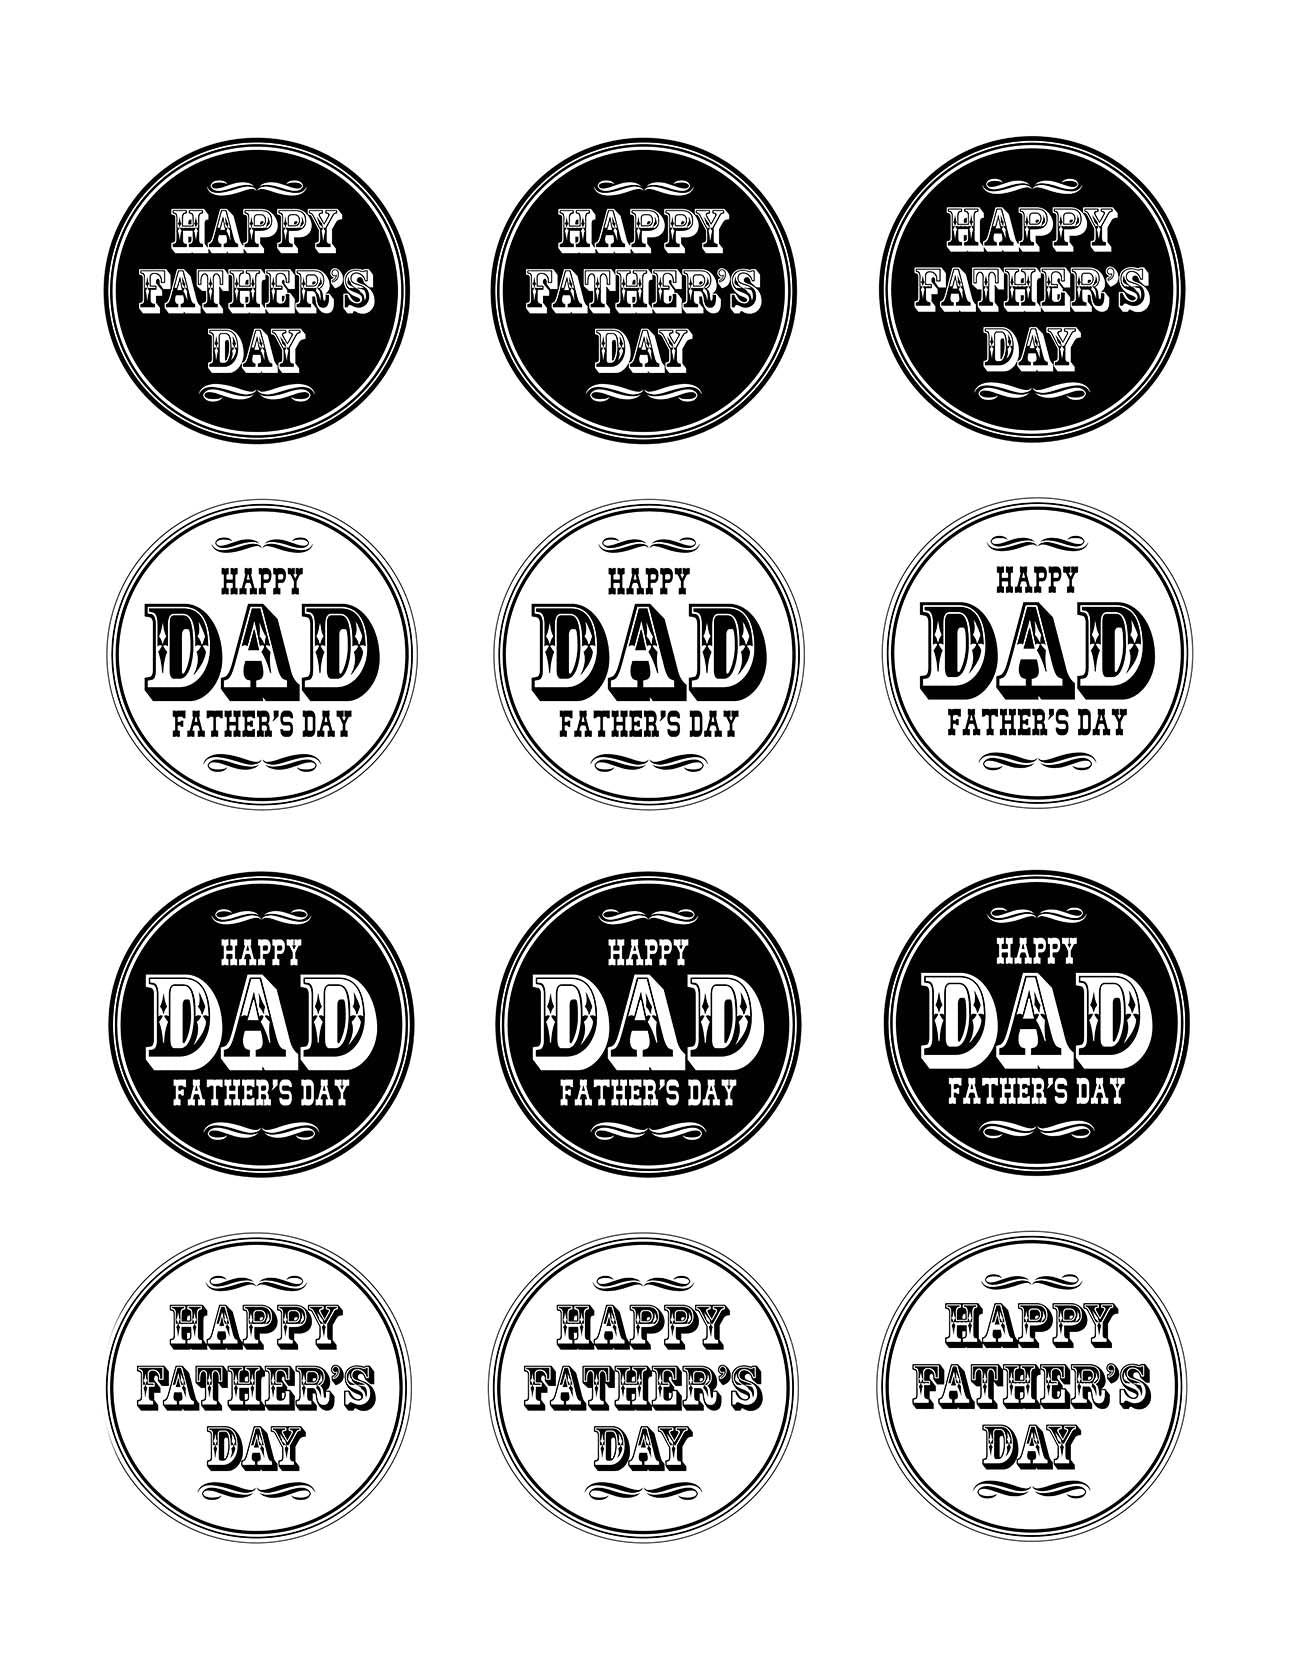 Happy Father's Day – Pre - cut Edible Icing Image - Set 3 - printsoncakes - Edible Image service provider